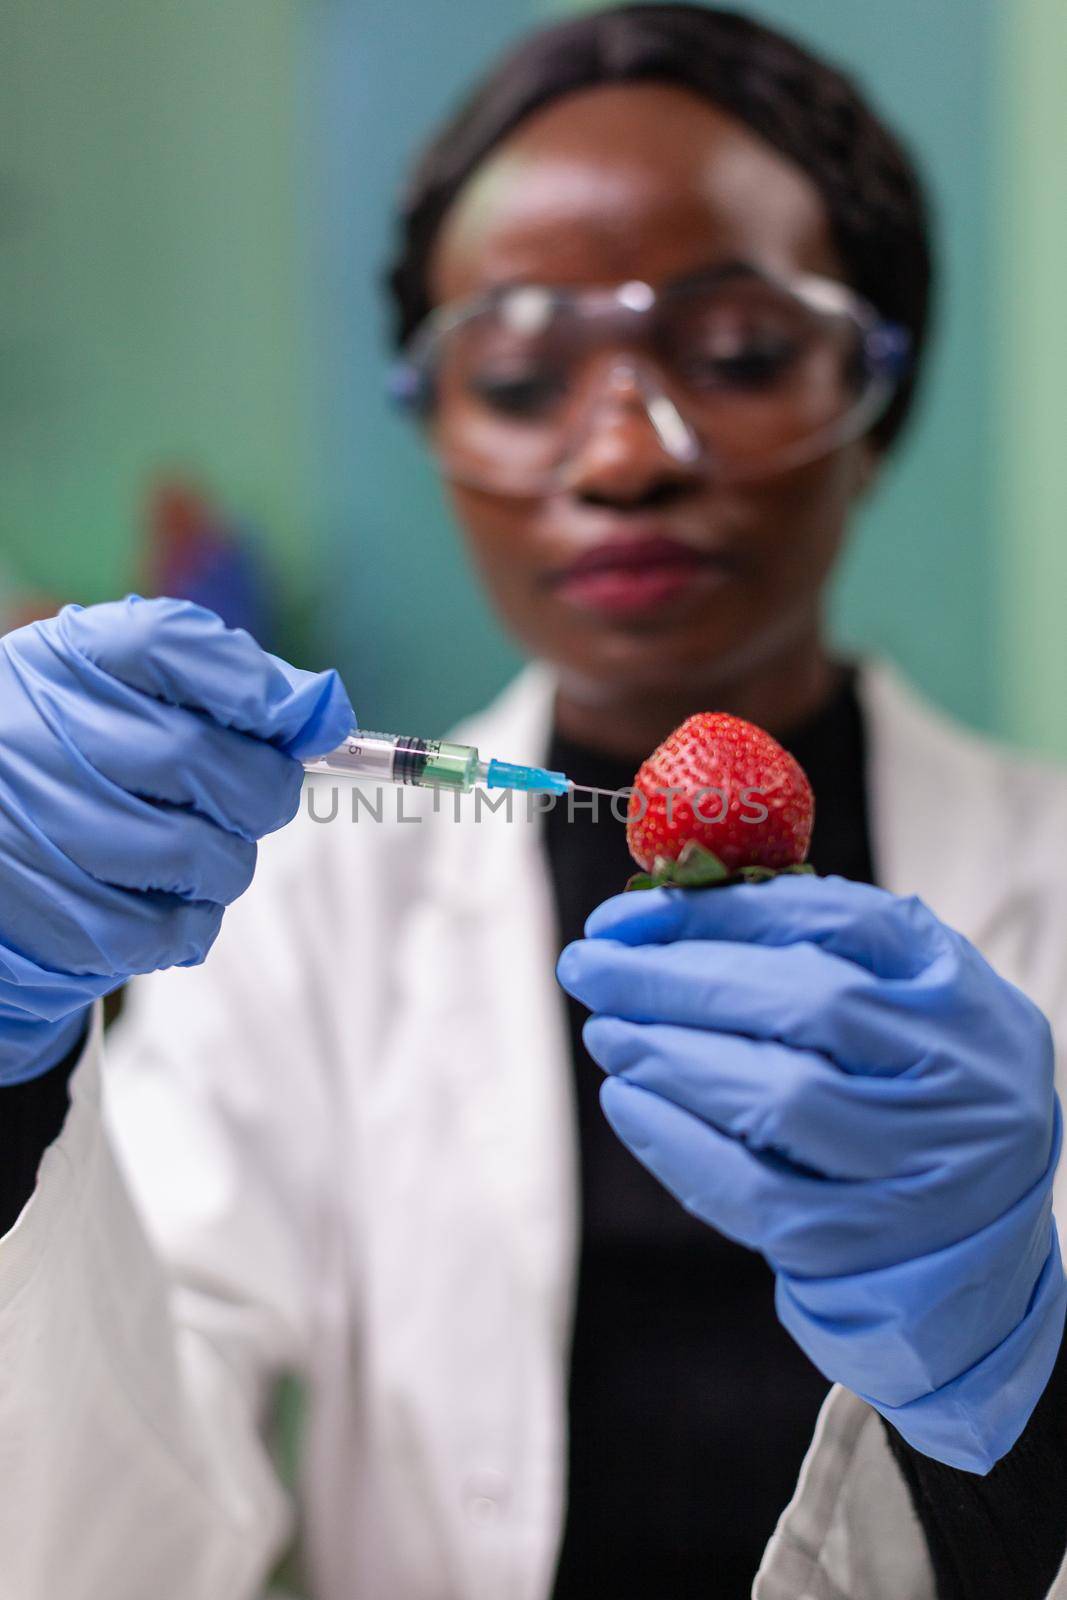 Closeup chemist scientist injecting nature strawberry with chemical pesticides using medical syringe for botany expertise. Biochemist working in biology laboratory testing health food.